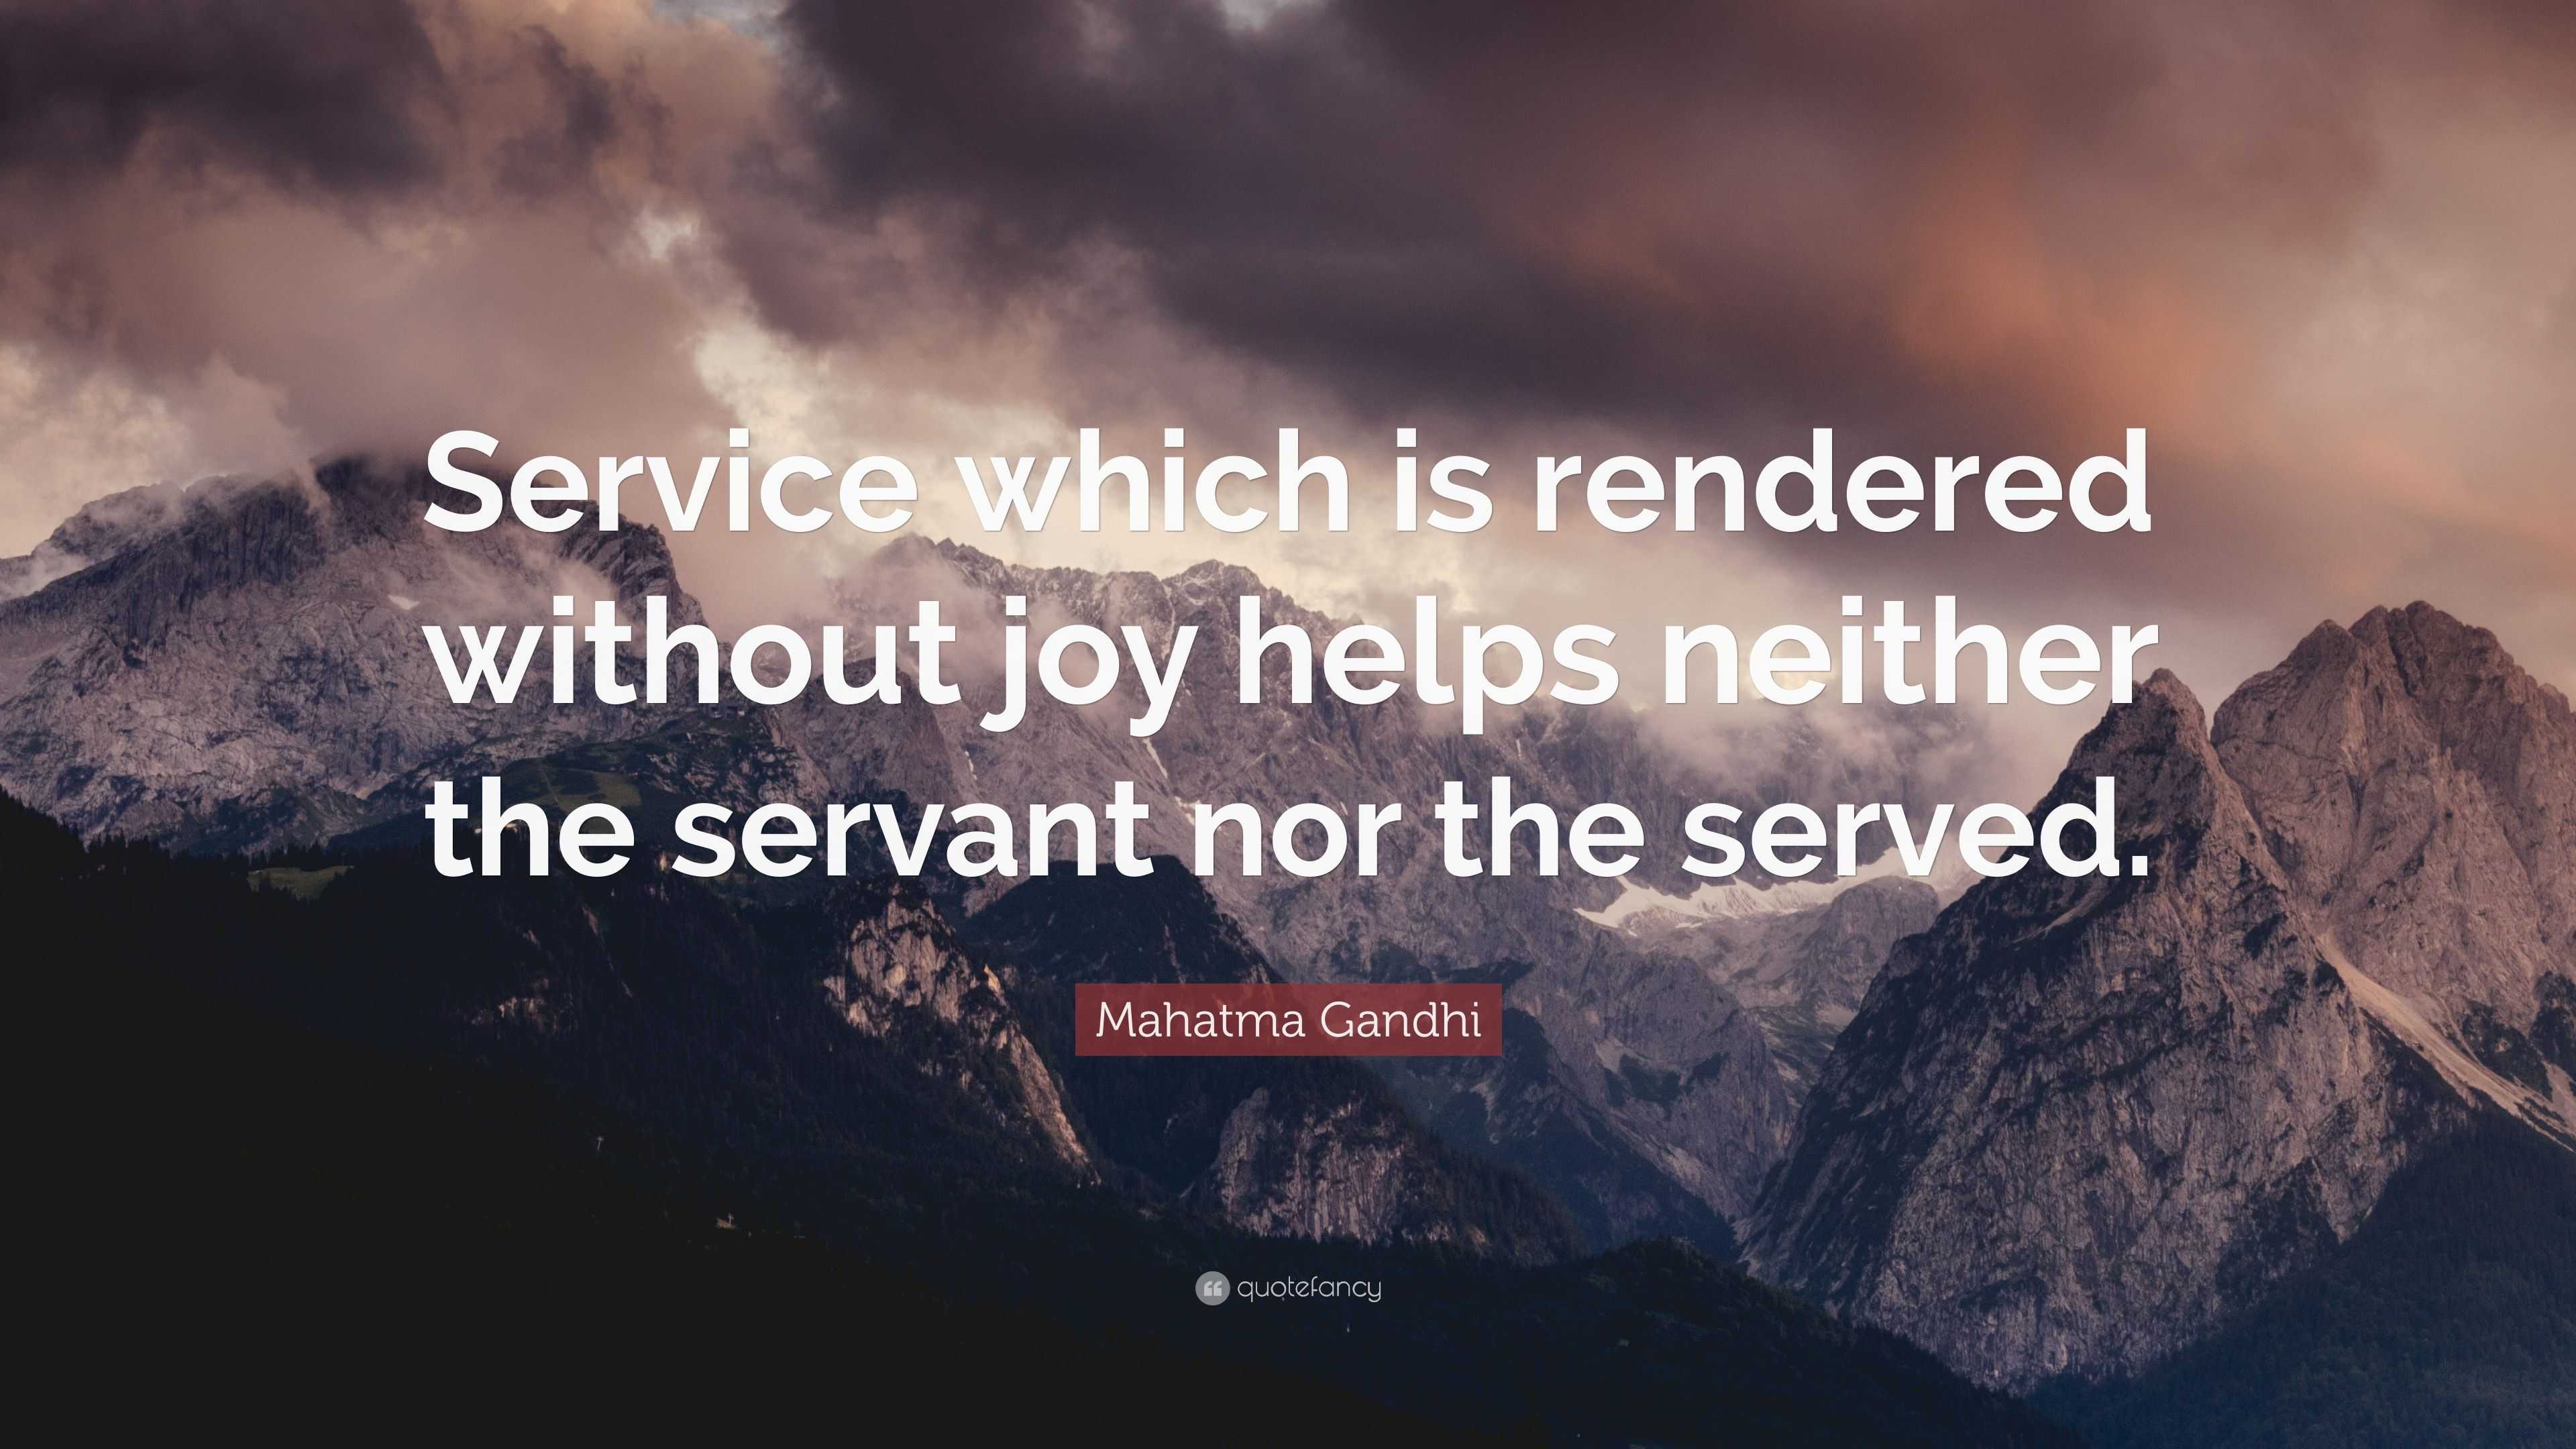 mahatma-gandhi-quote-service-which-is-rendered-without-joy-helps